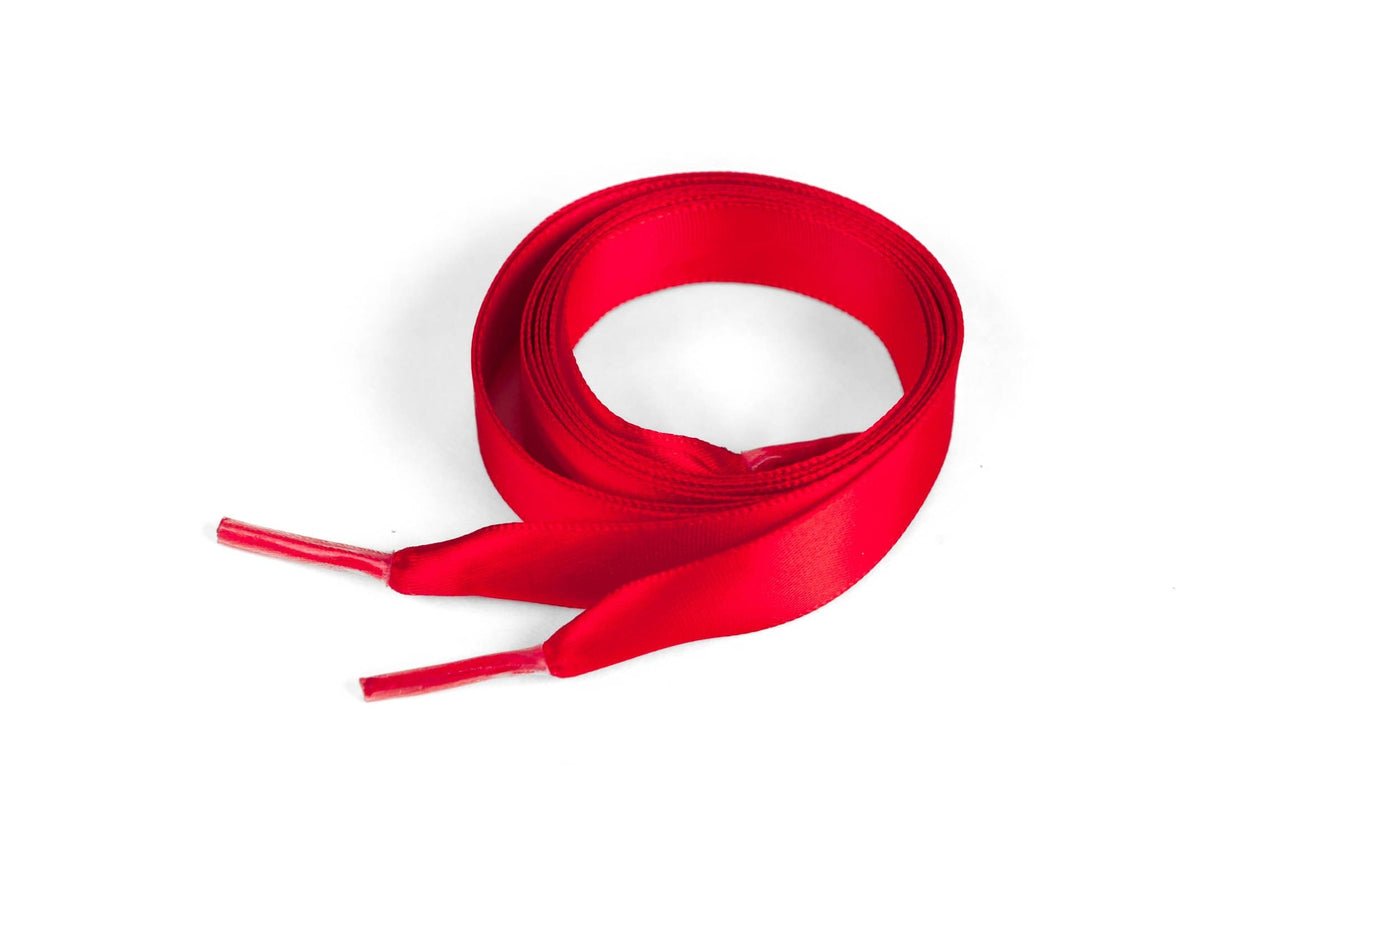 Satin Ribbon 5/8" Premium Quality Shoelaces - 36" Inch Length Red